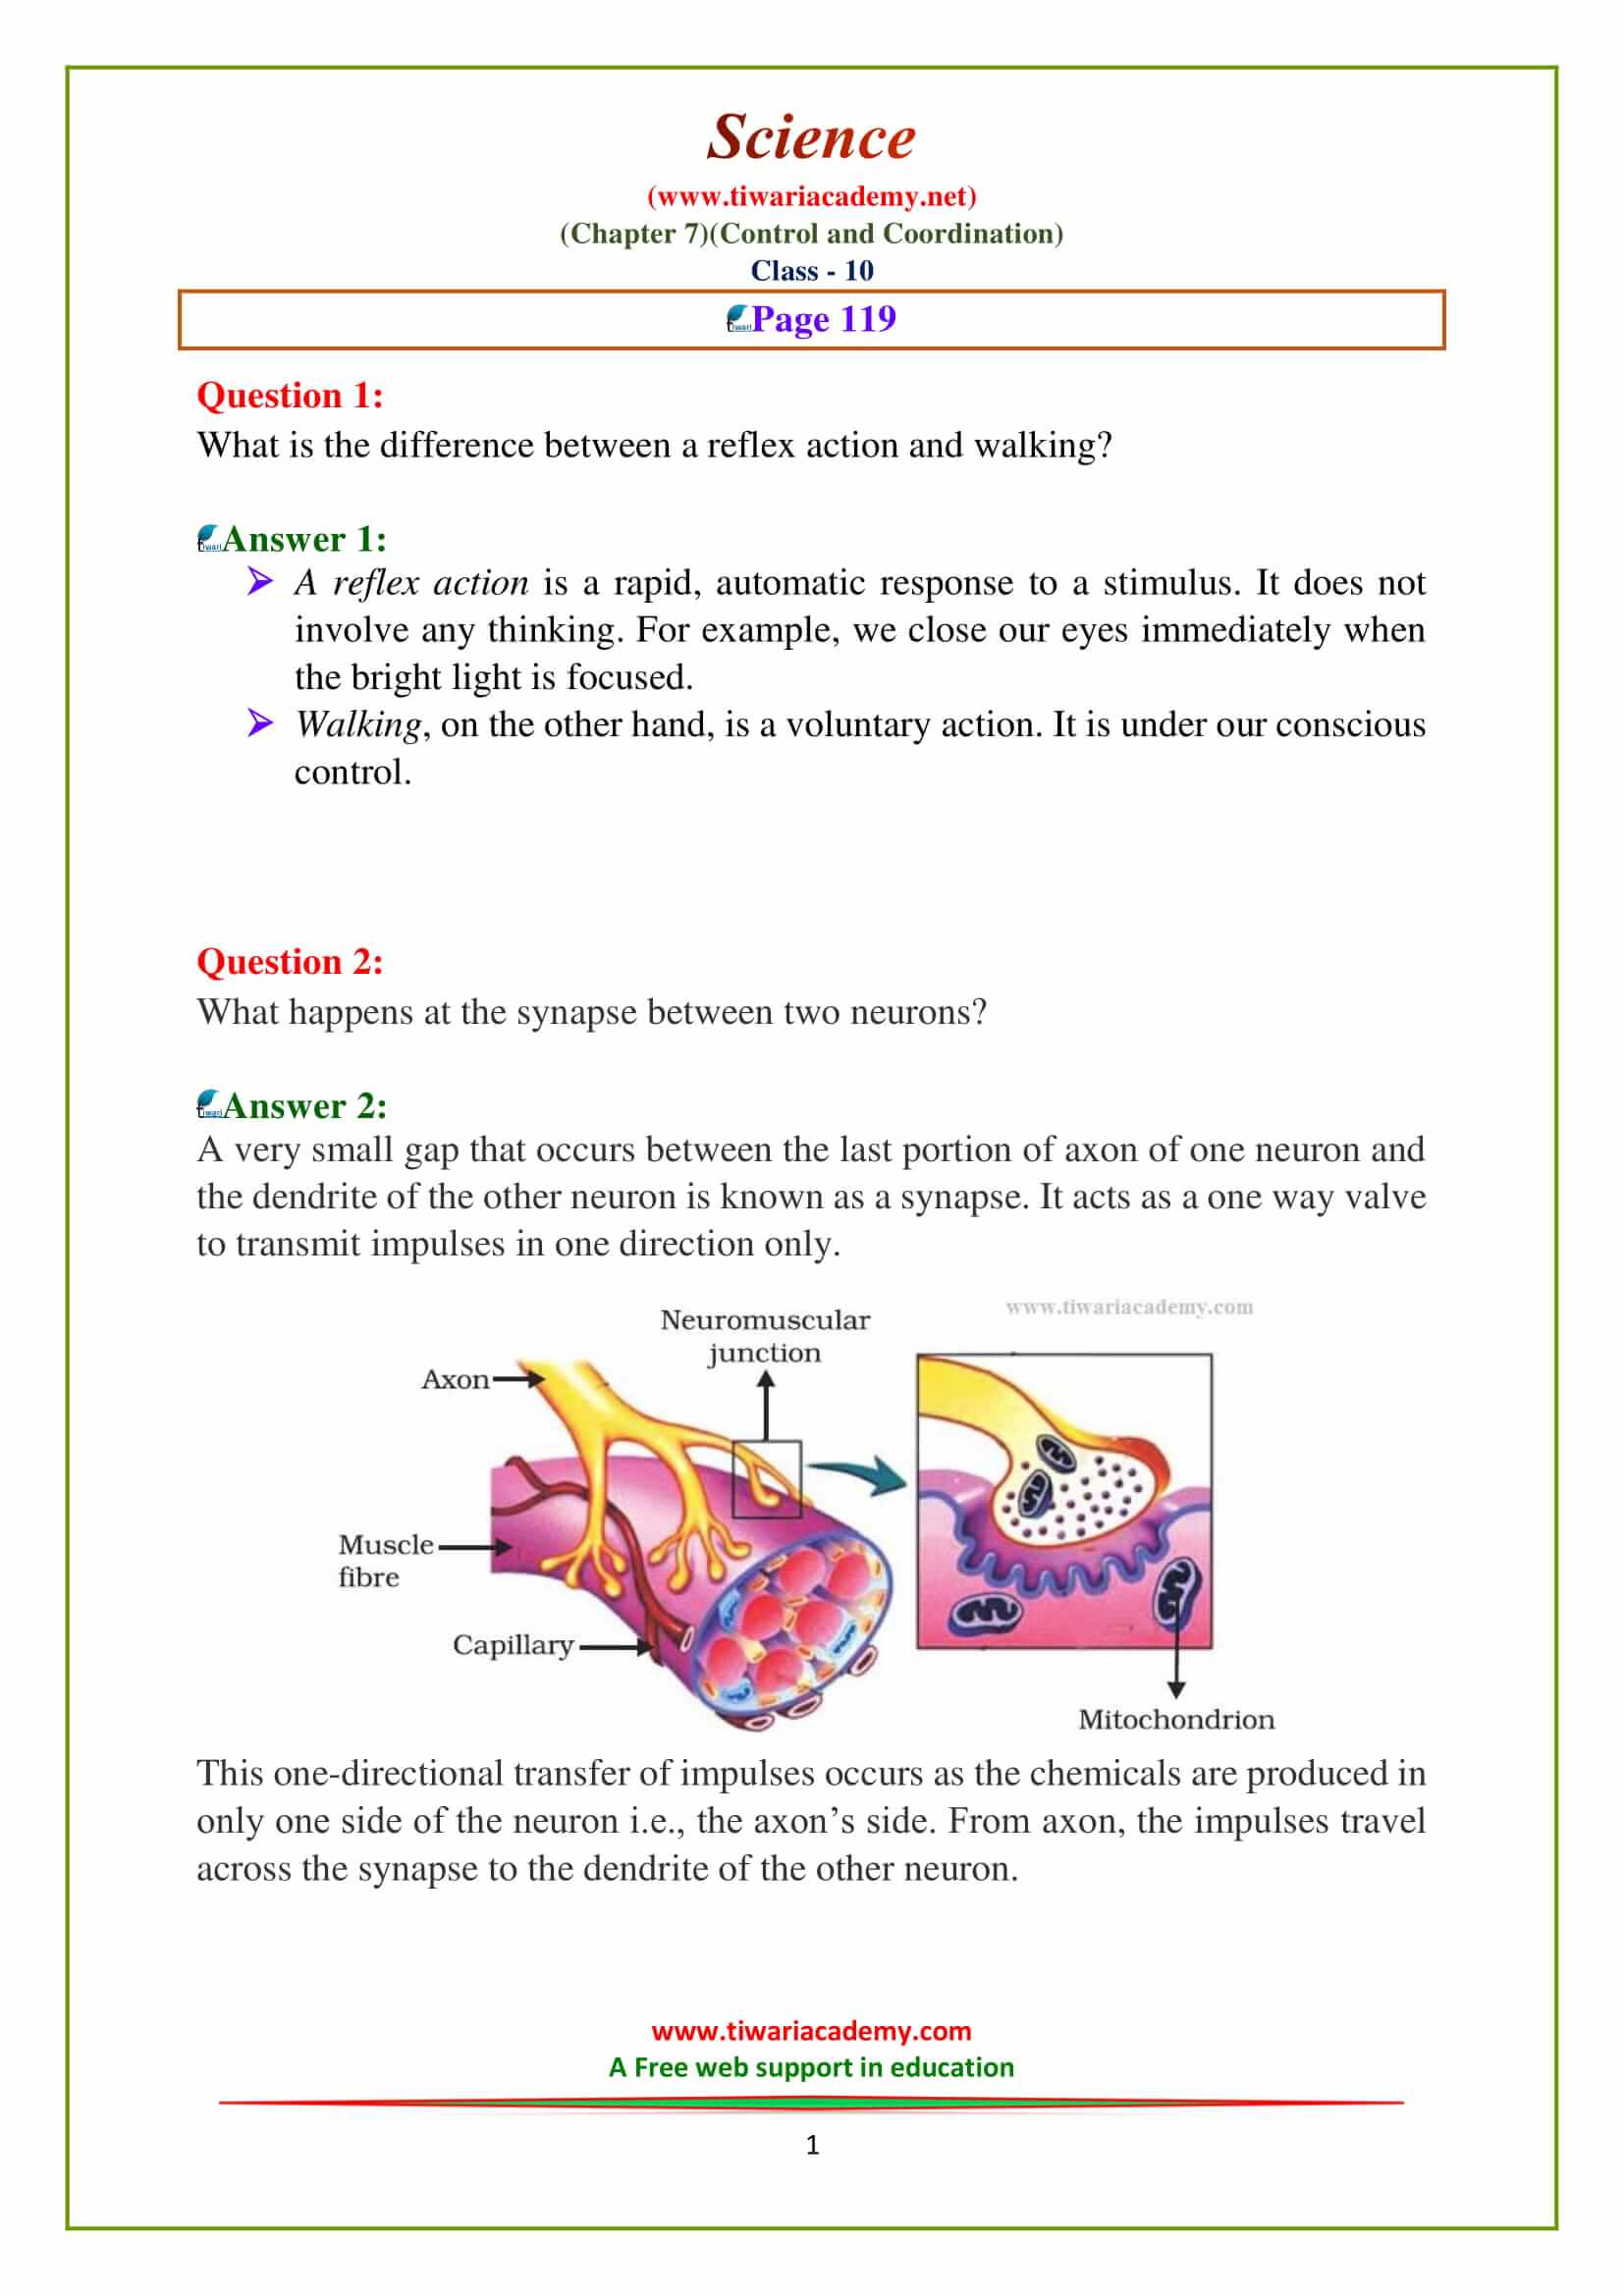 NCERT Solutions for Class 10 Science Chapter 7 Control and Coordination Intext questions on page 119